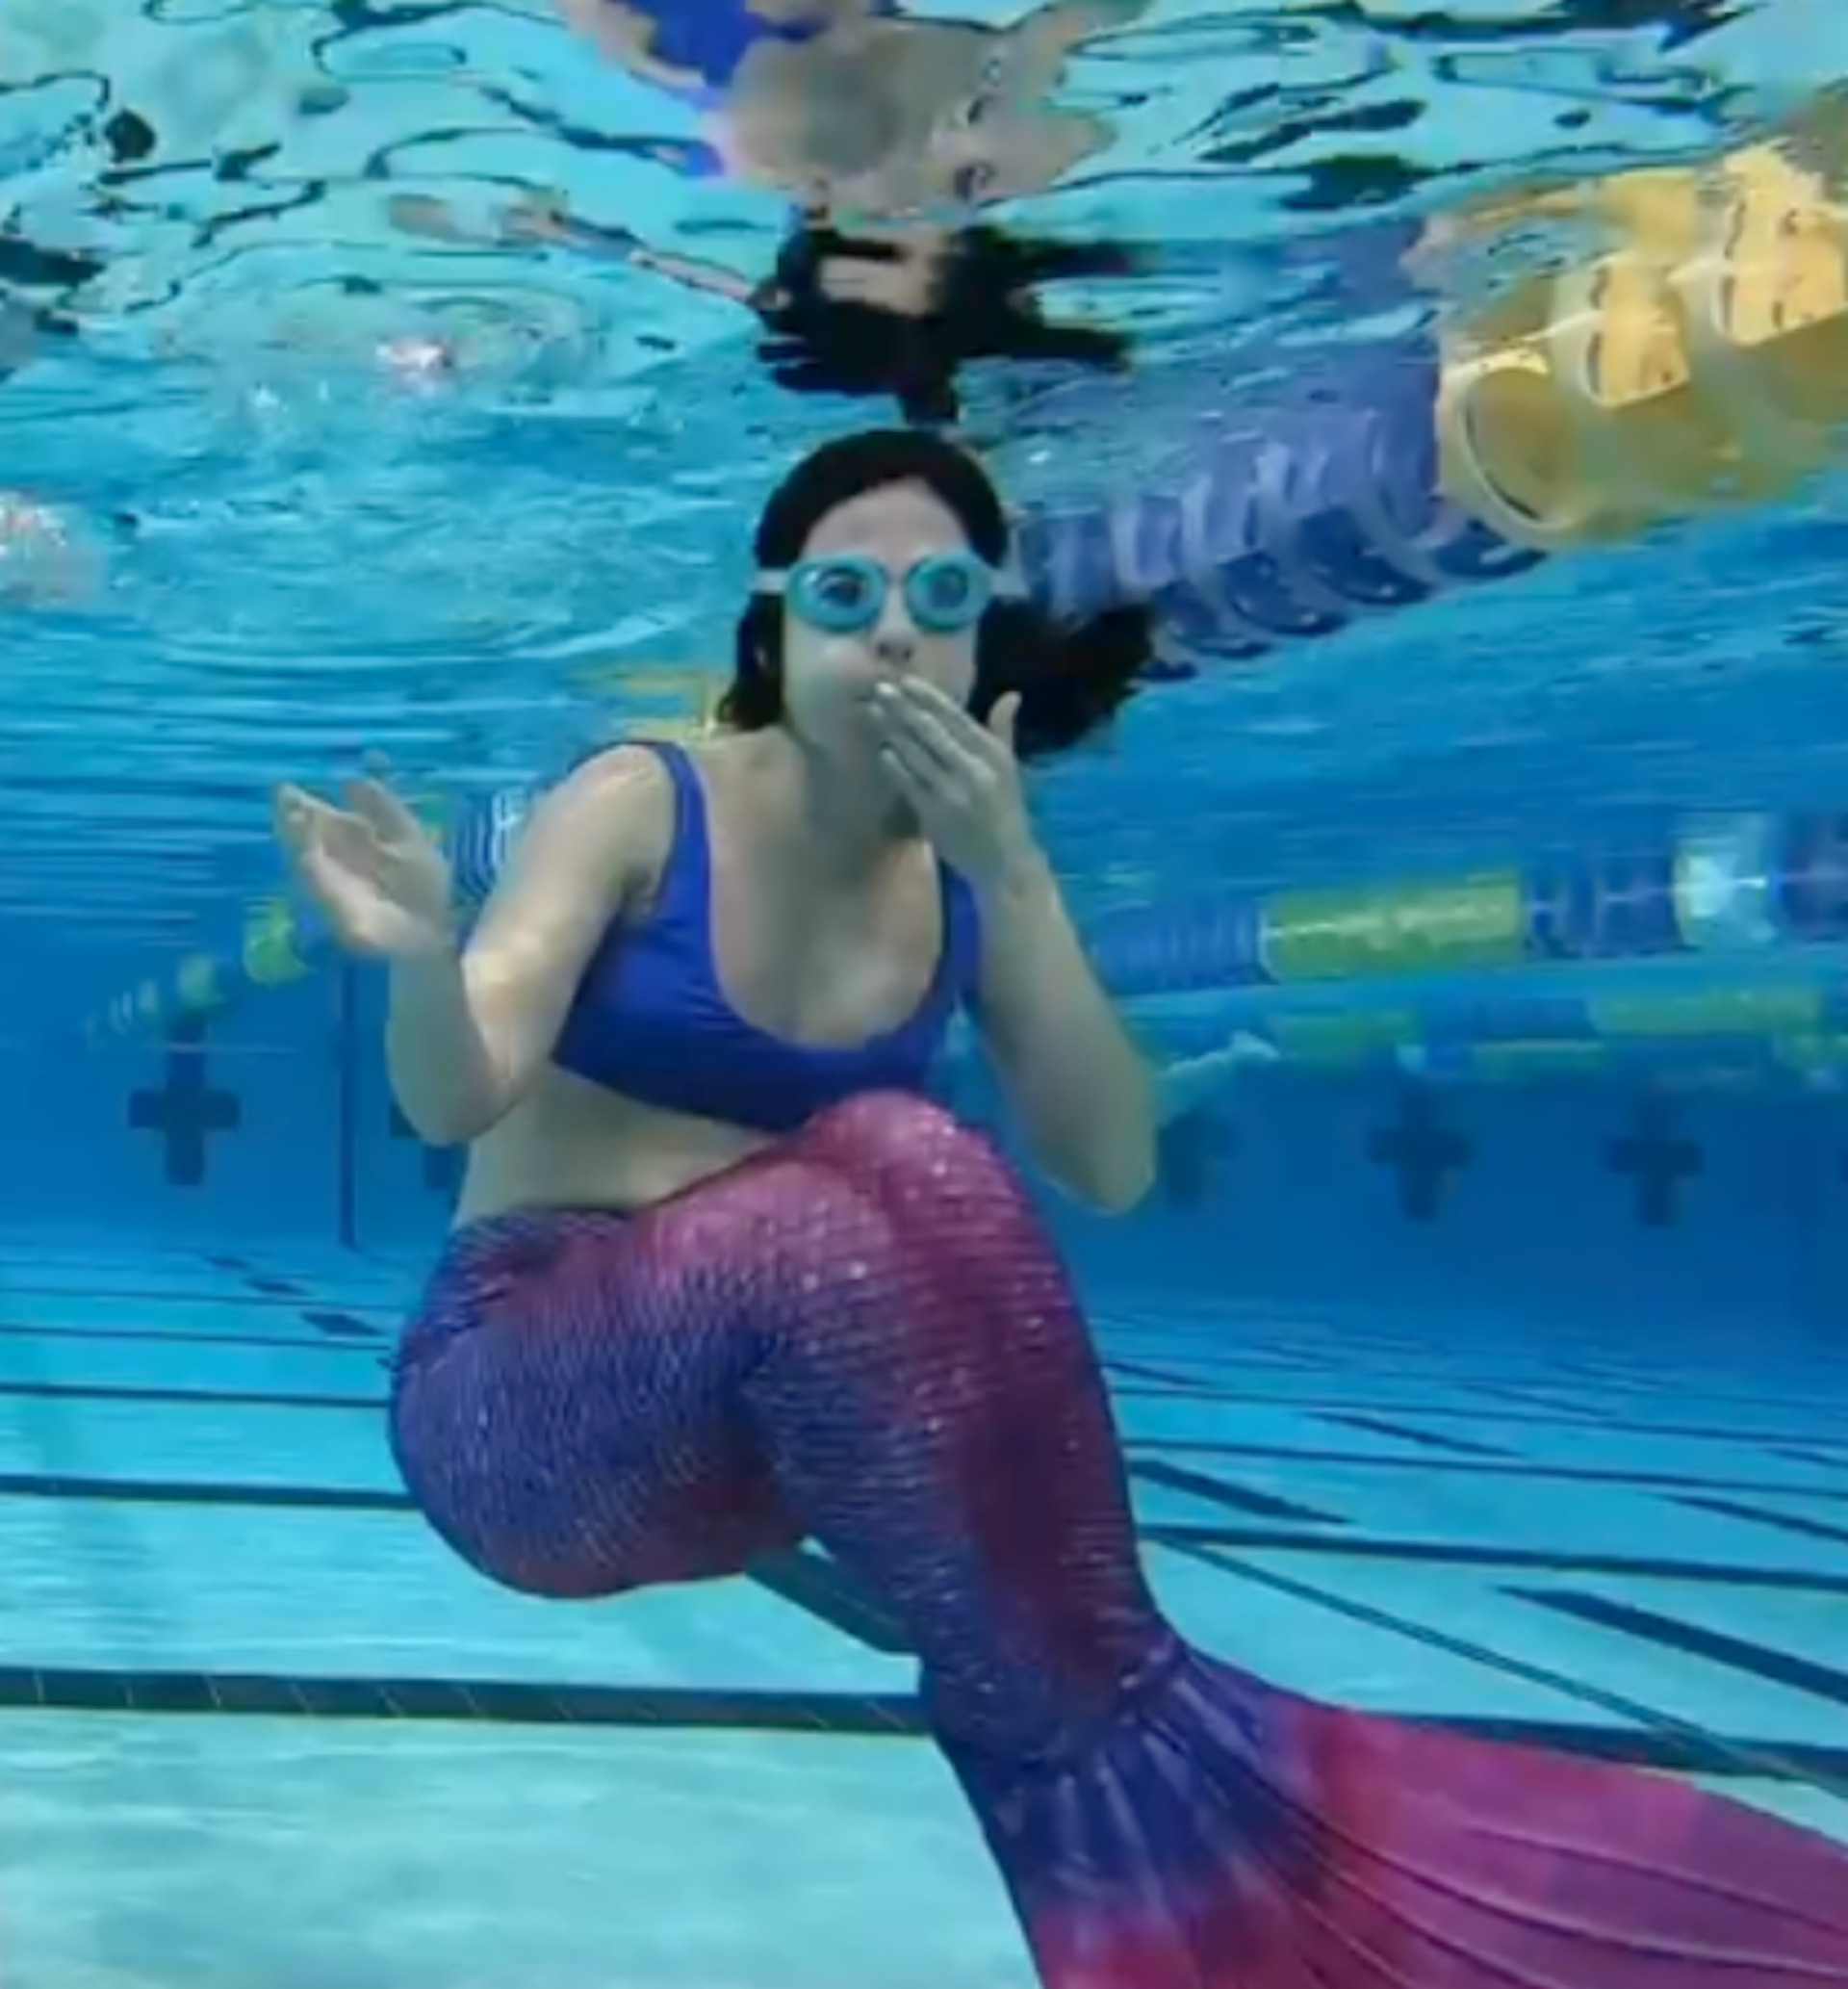 The writer in full mermaiding gear is underwater at a swimming pool with Googles on, trying the hobby for the first time